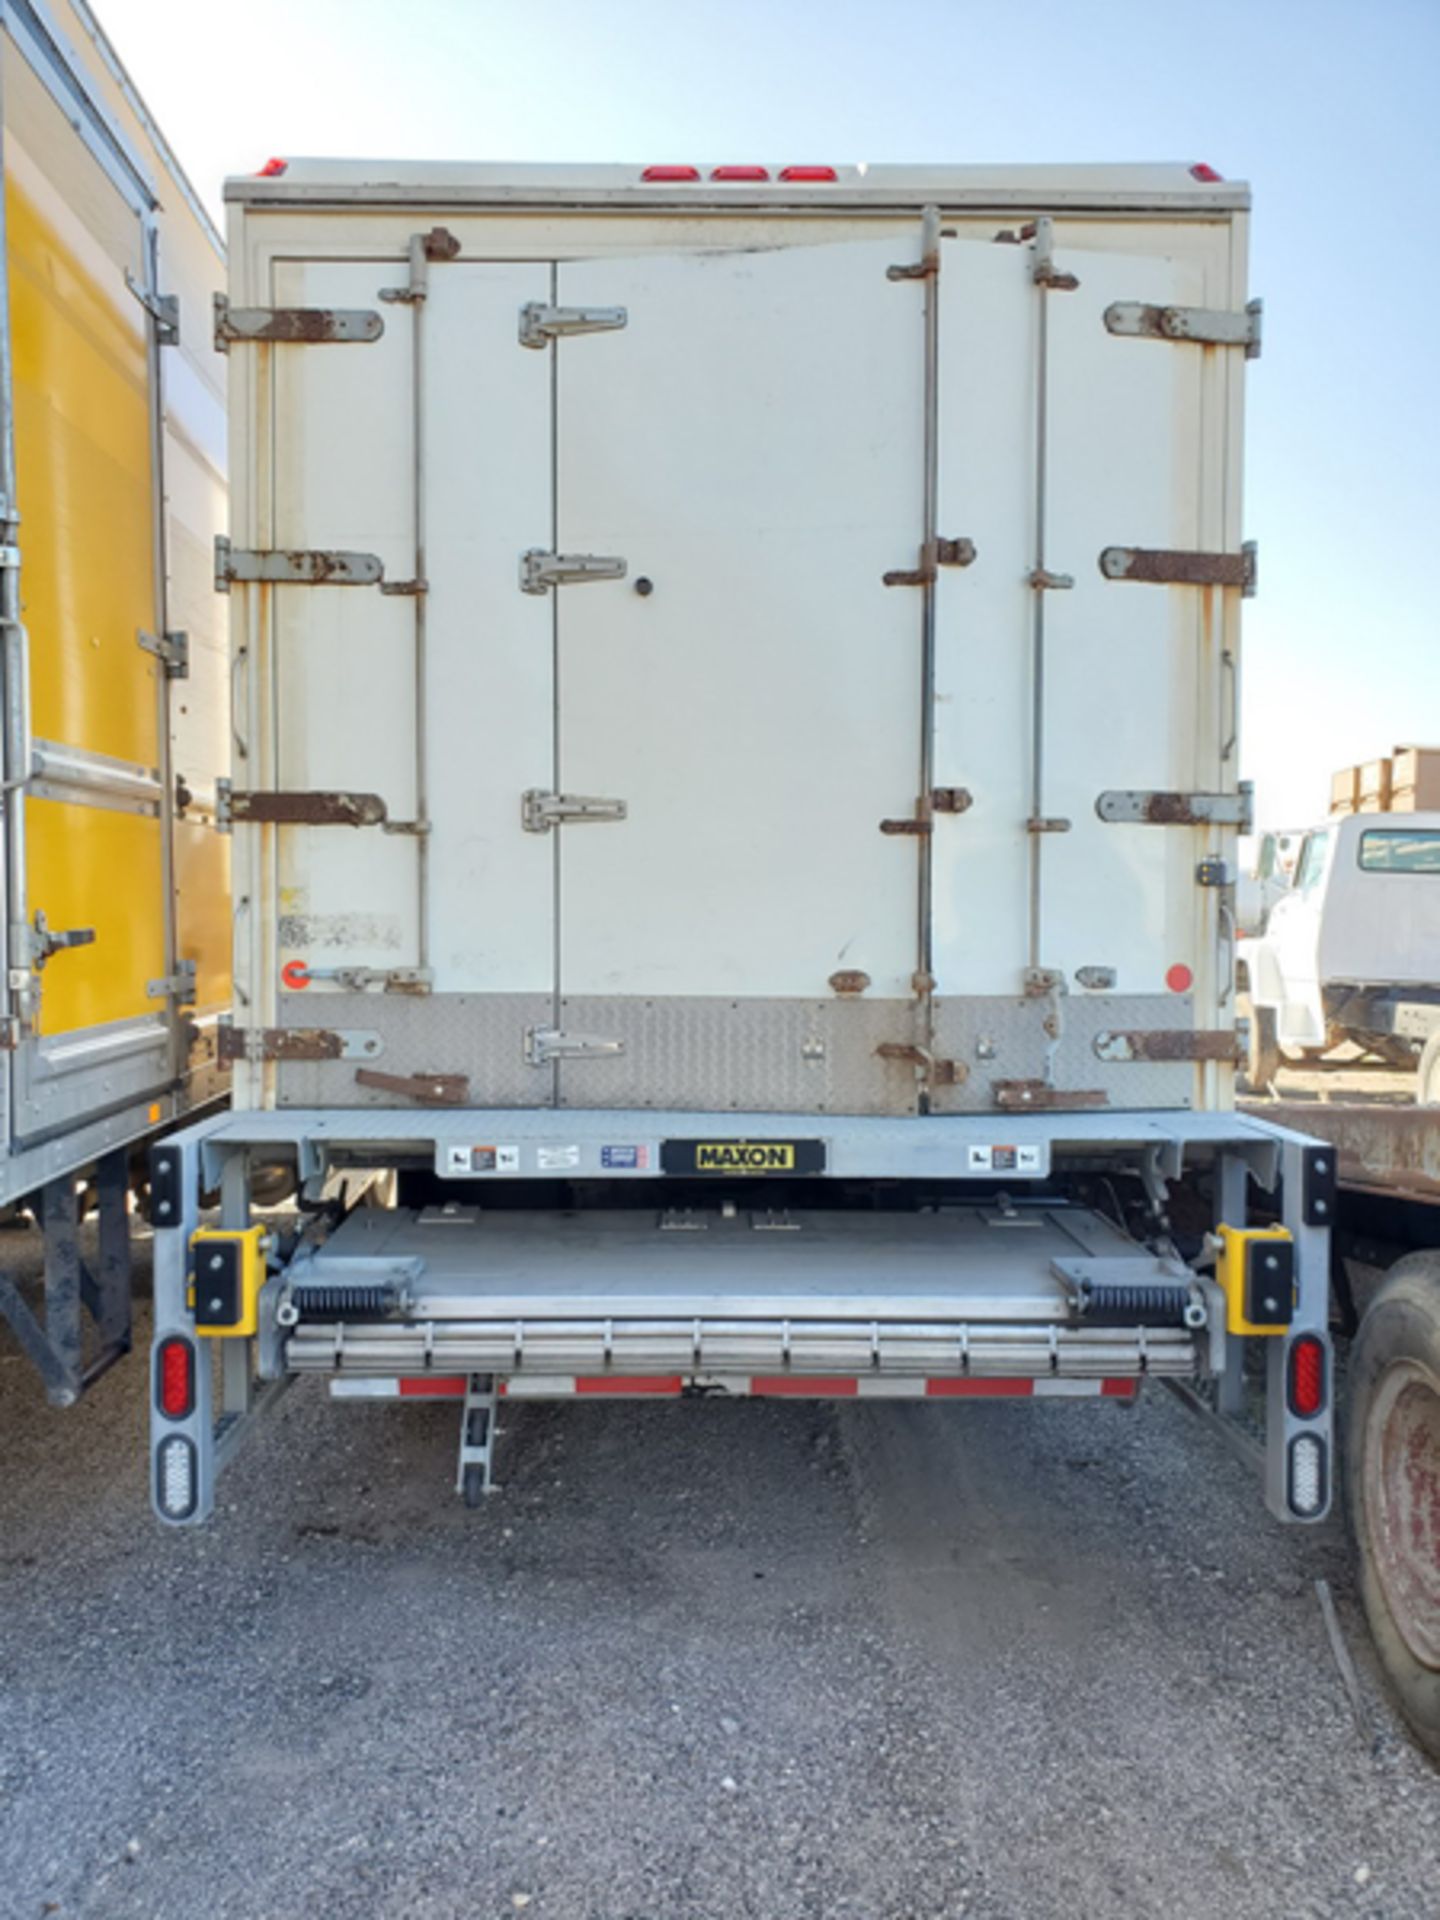 2018 INTERNATIONAL 4400 SBA 6X4 REFRIGERATED BOX TRUCK VIN#: 1HTMSTAR0JH529612, Approx Miles: 65918, - Image 3 of 8